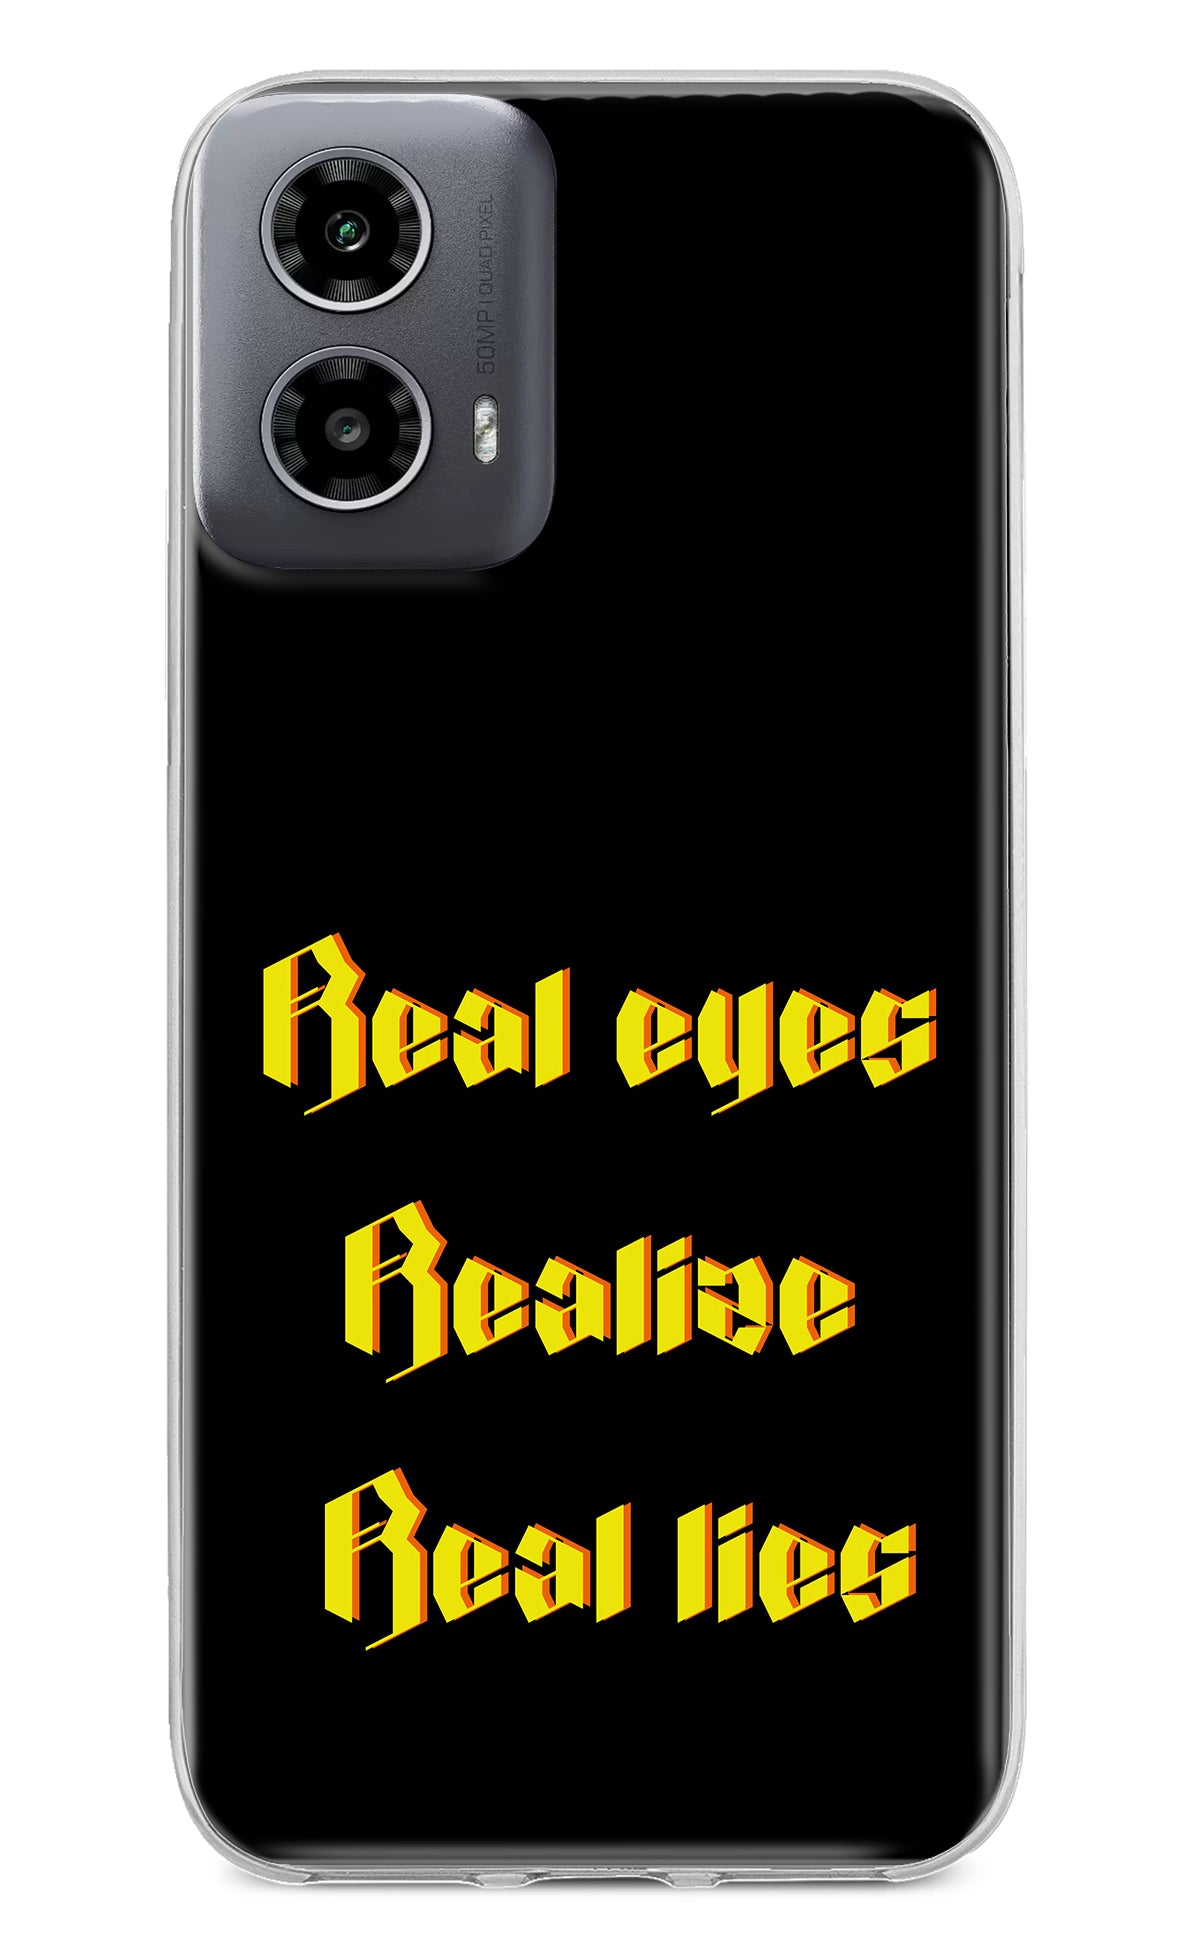 Real Eyes Realize Real Lies Moto G34 5G Back Cover